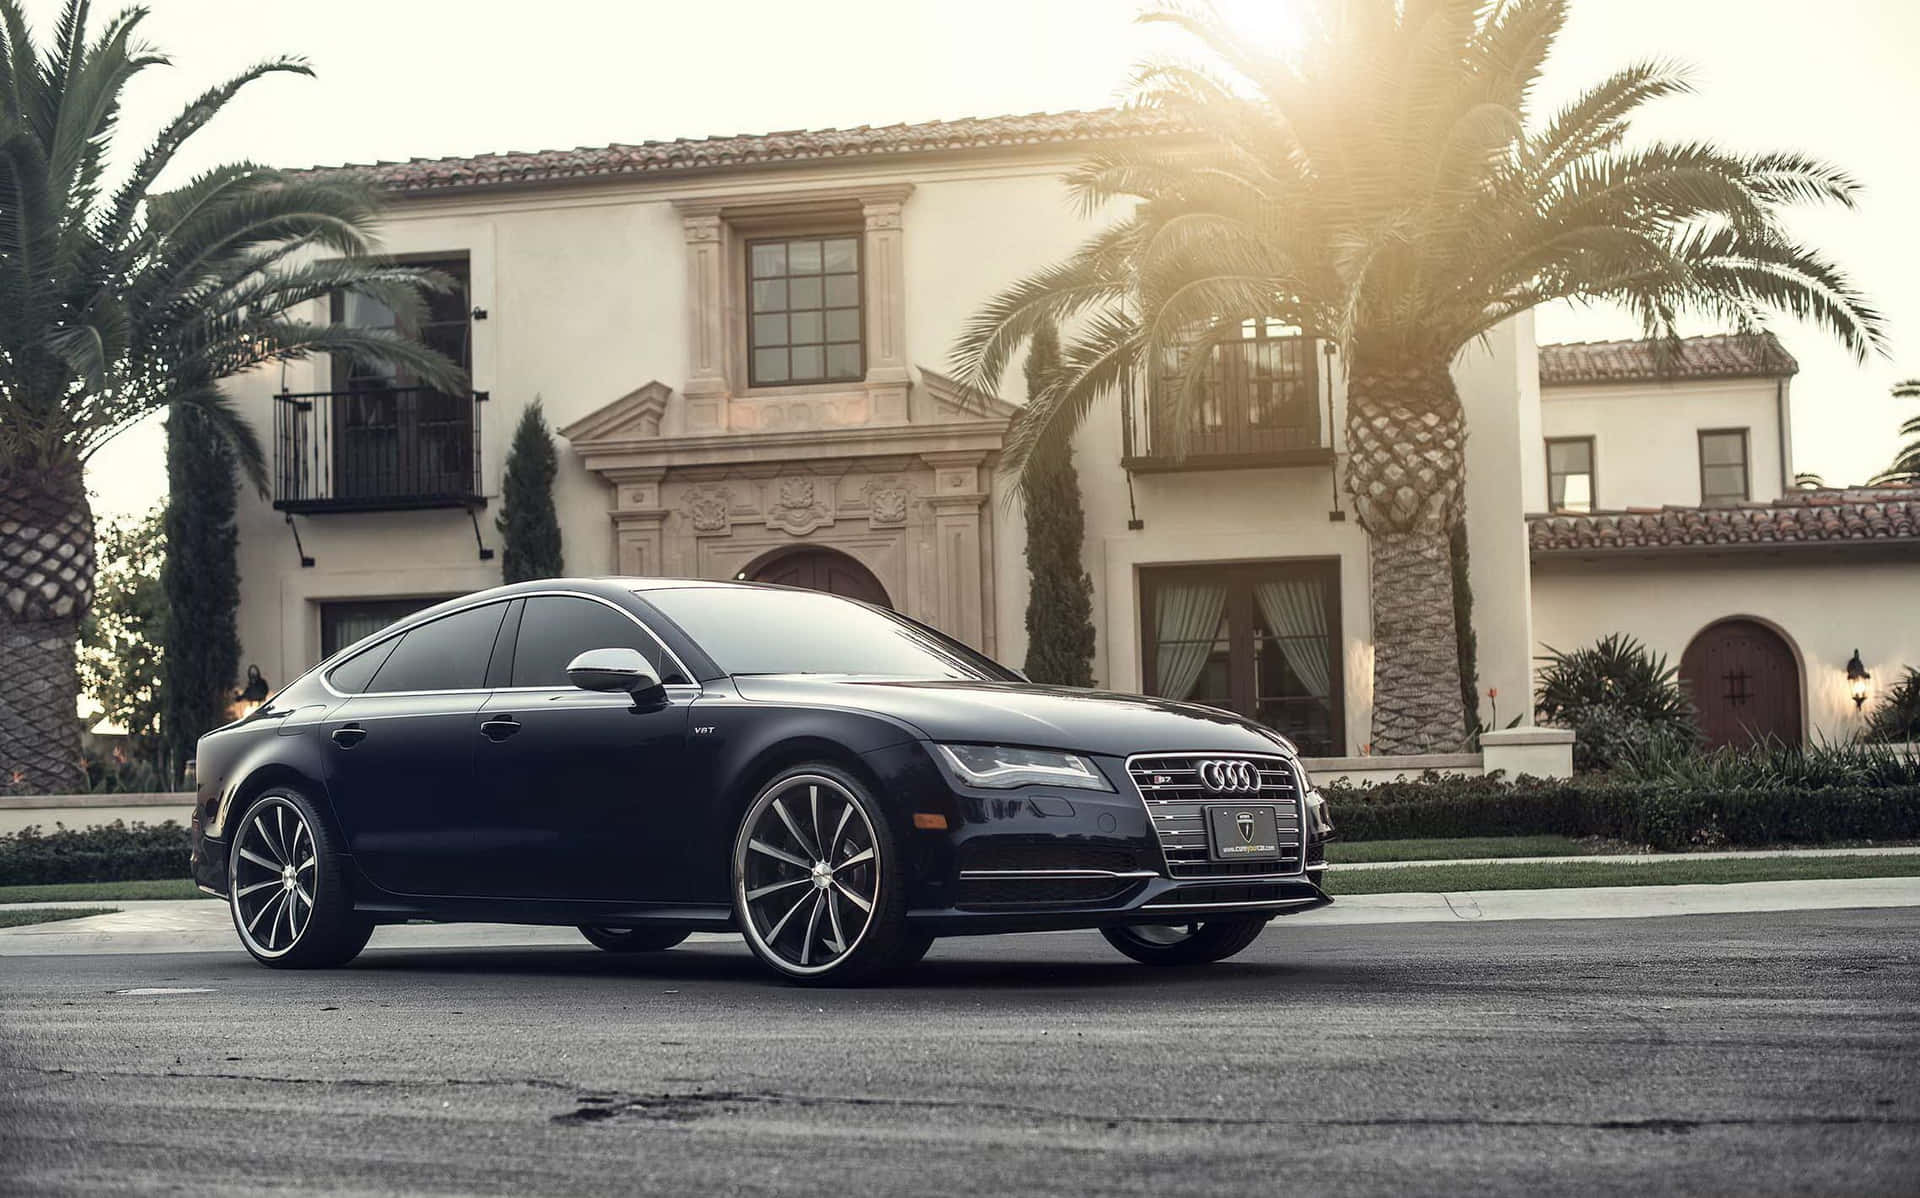 Sleek and Sophisticated Audi S7 in Motion Wallpaper